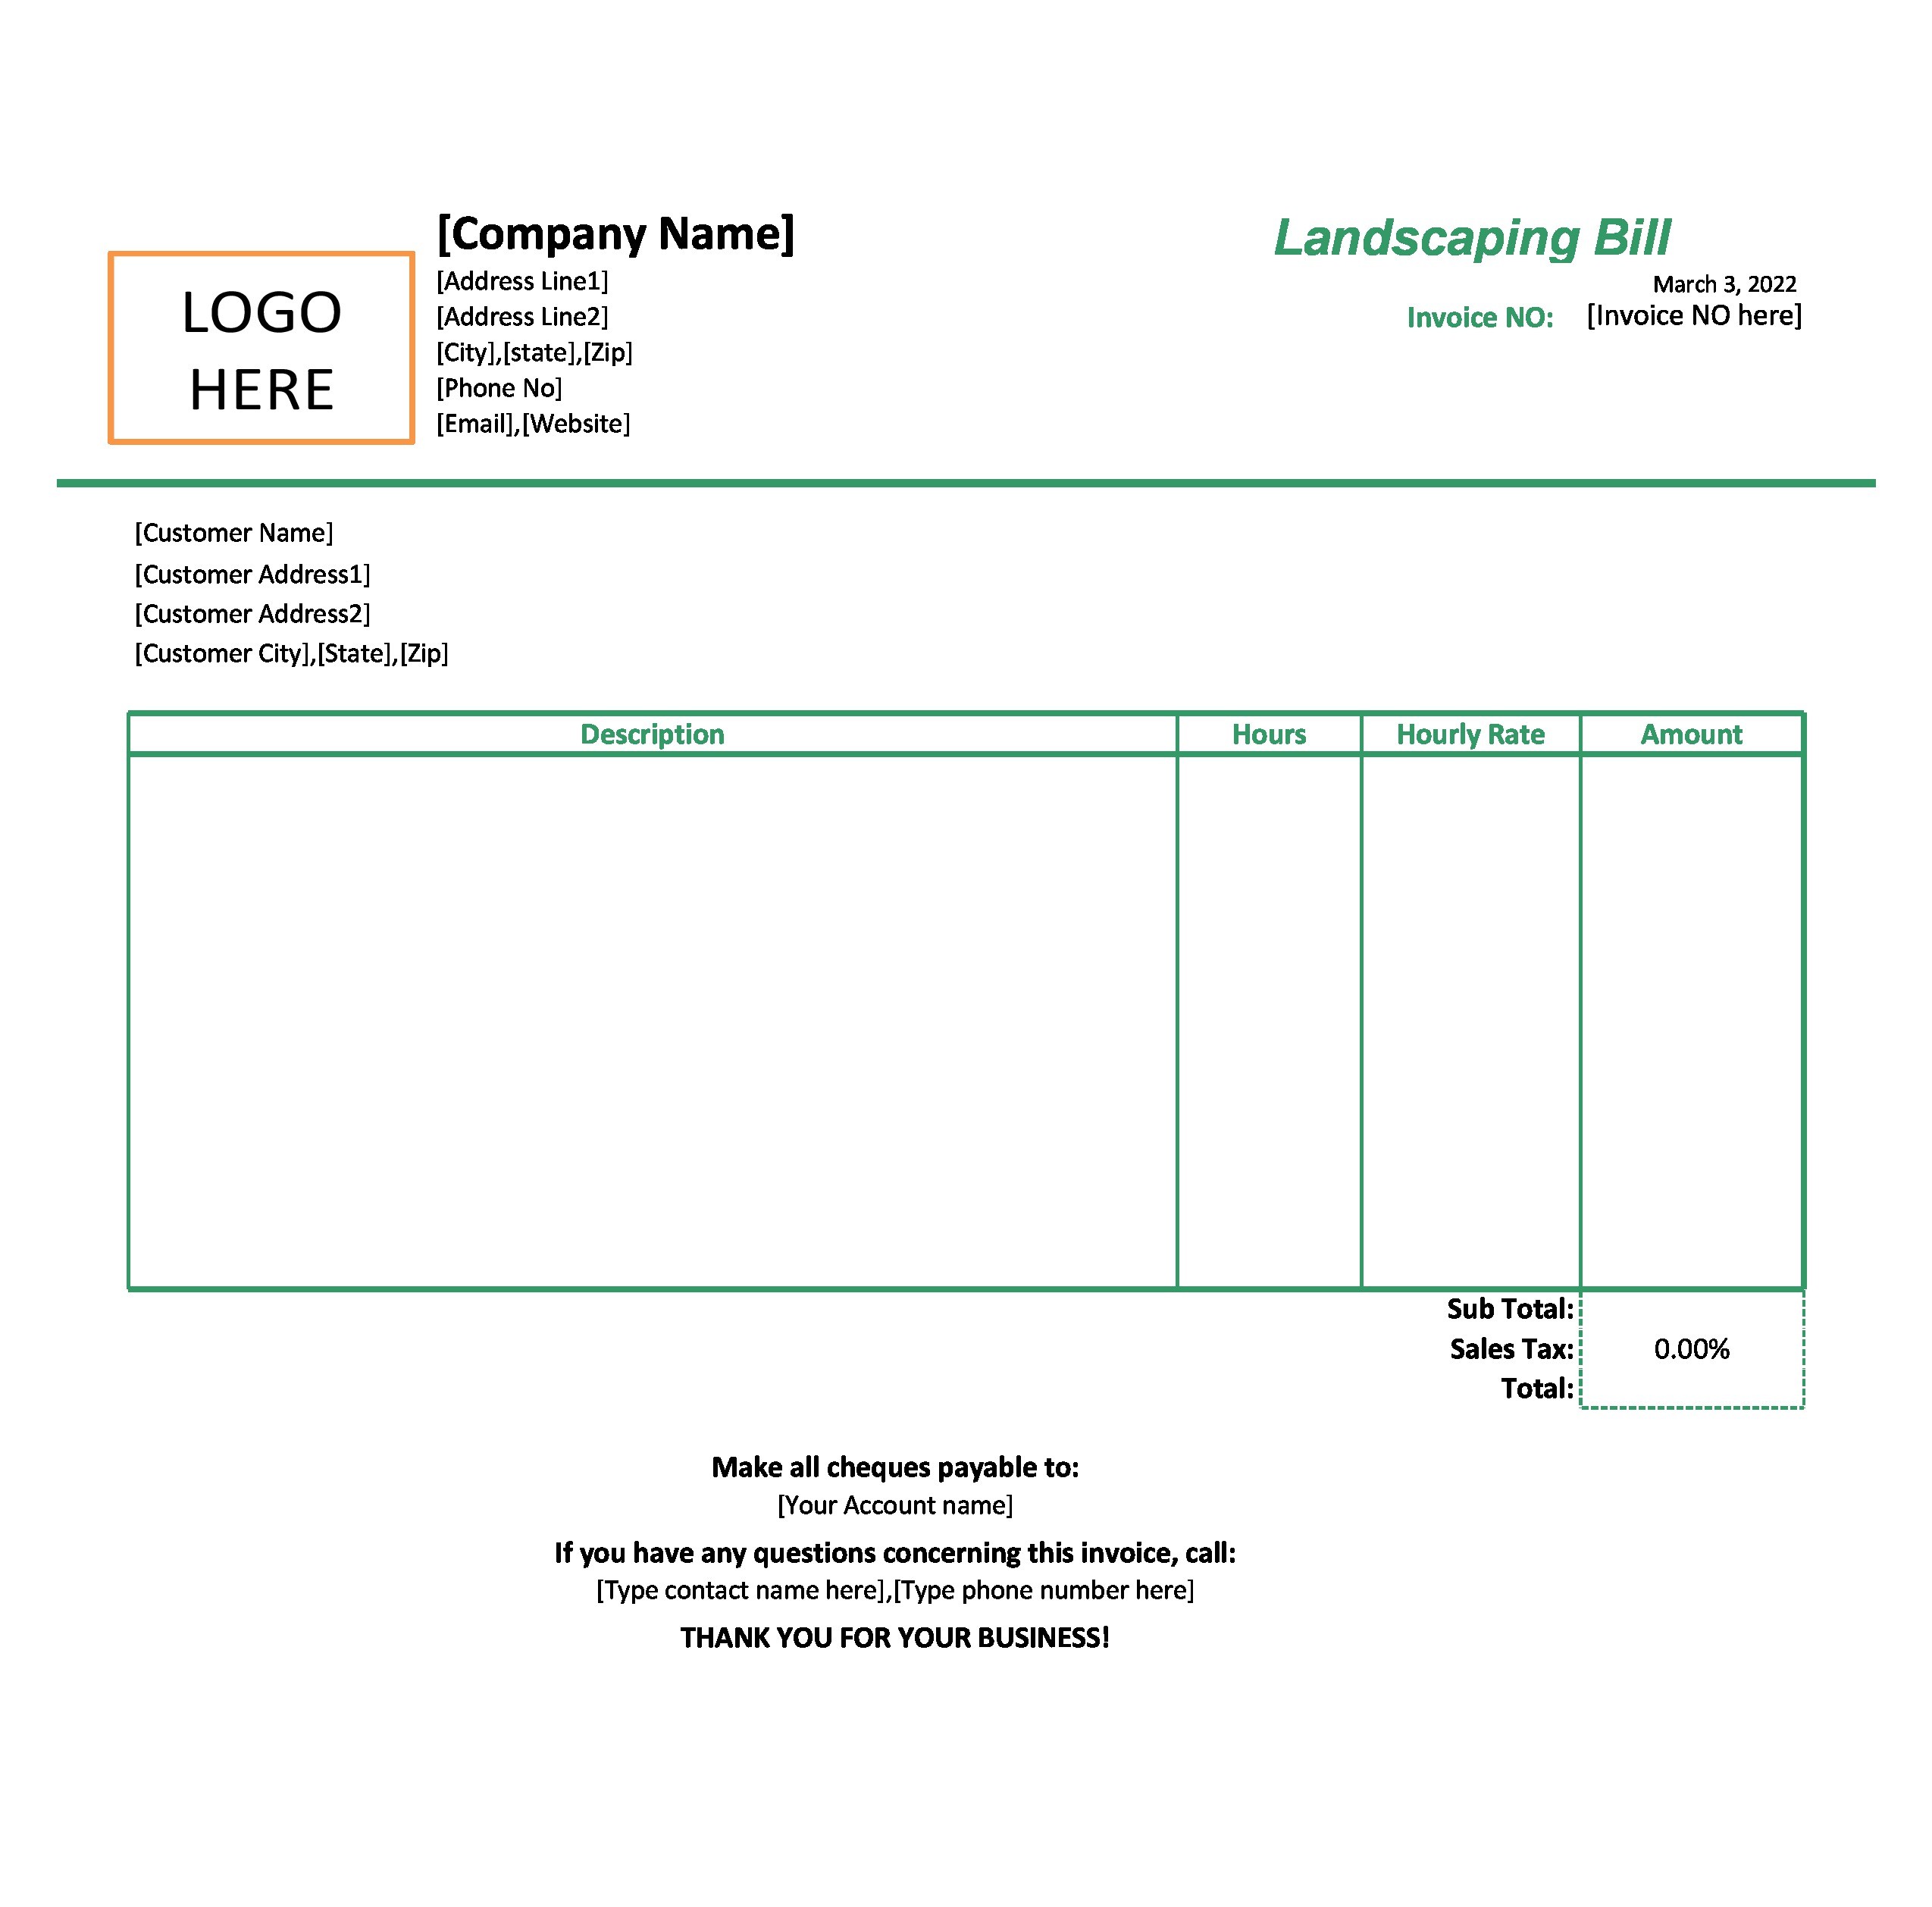 Free landscaping invoice 28